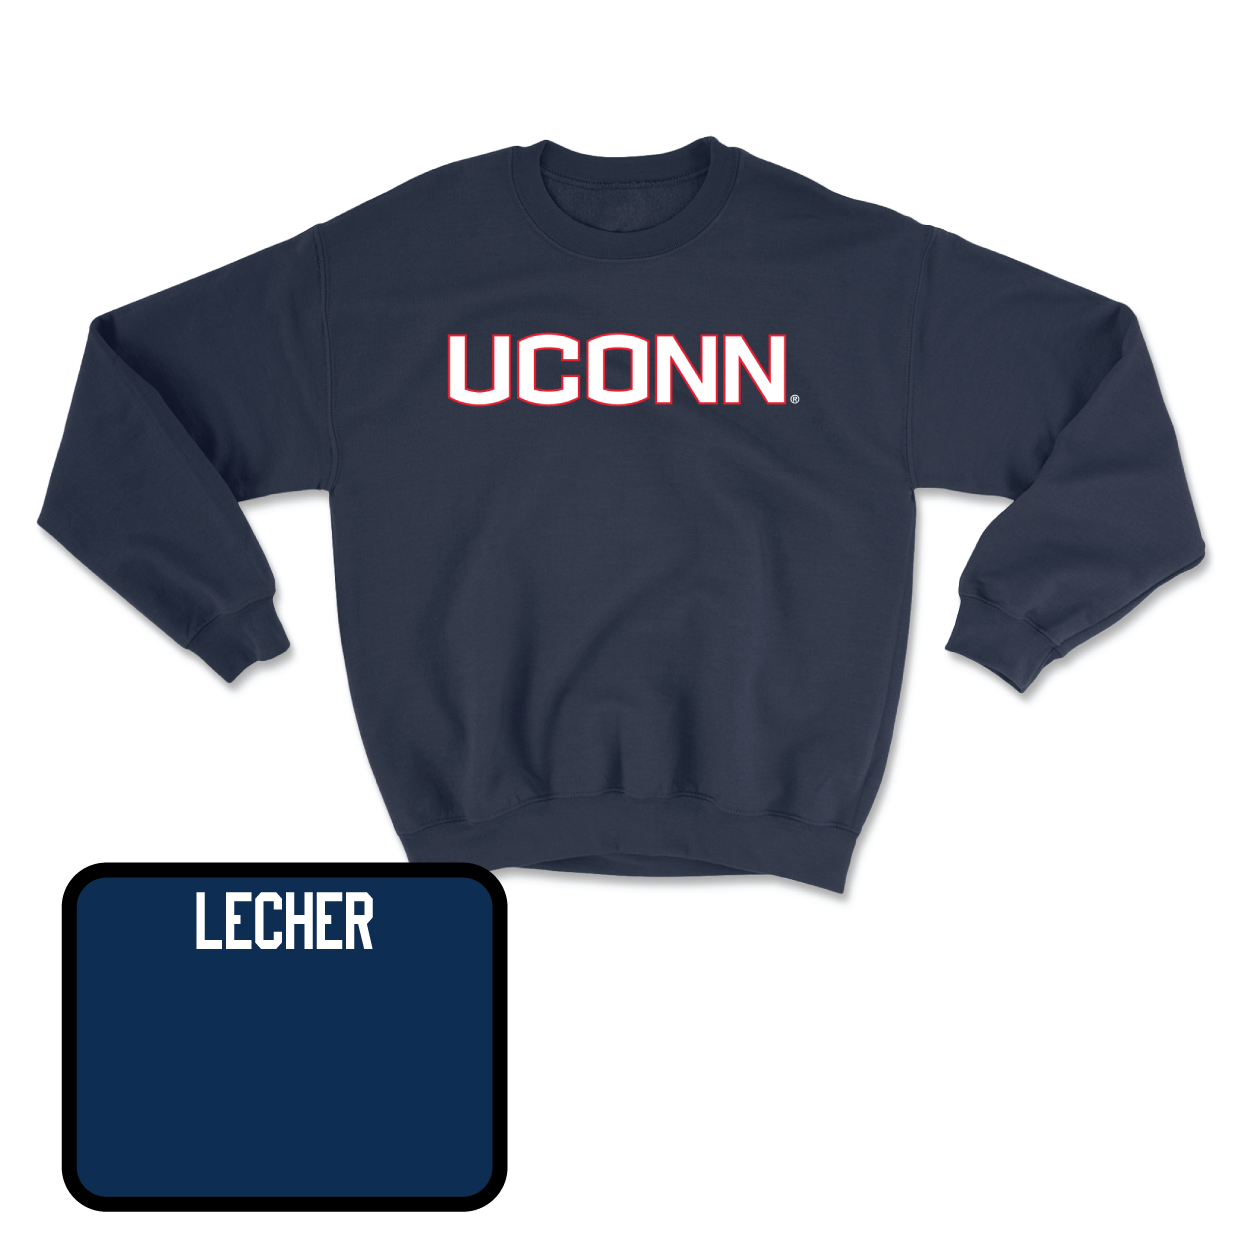 Navy Women's Rowing UConn Crewneck Youth Small / Sydell Lecher